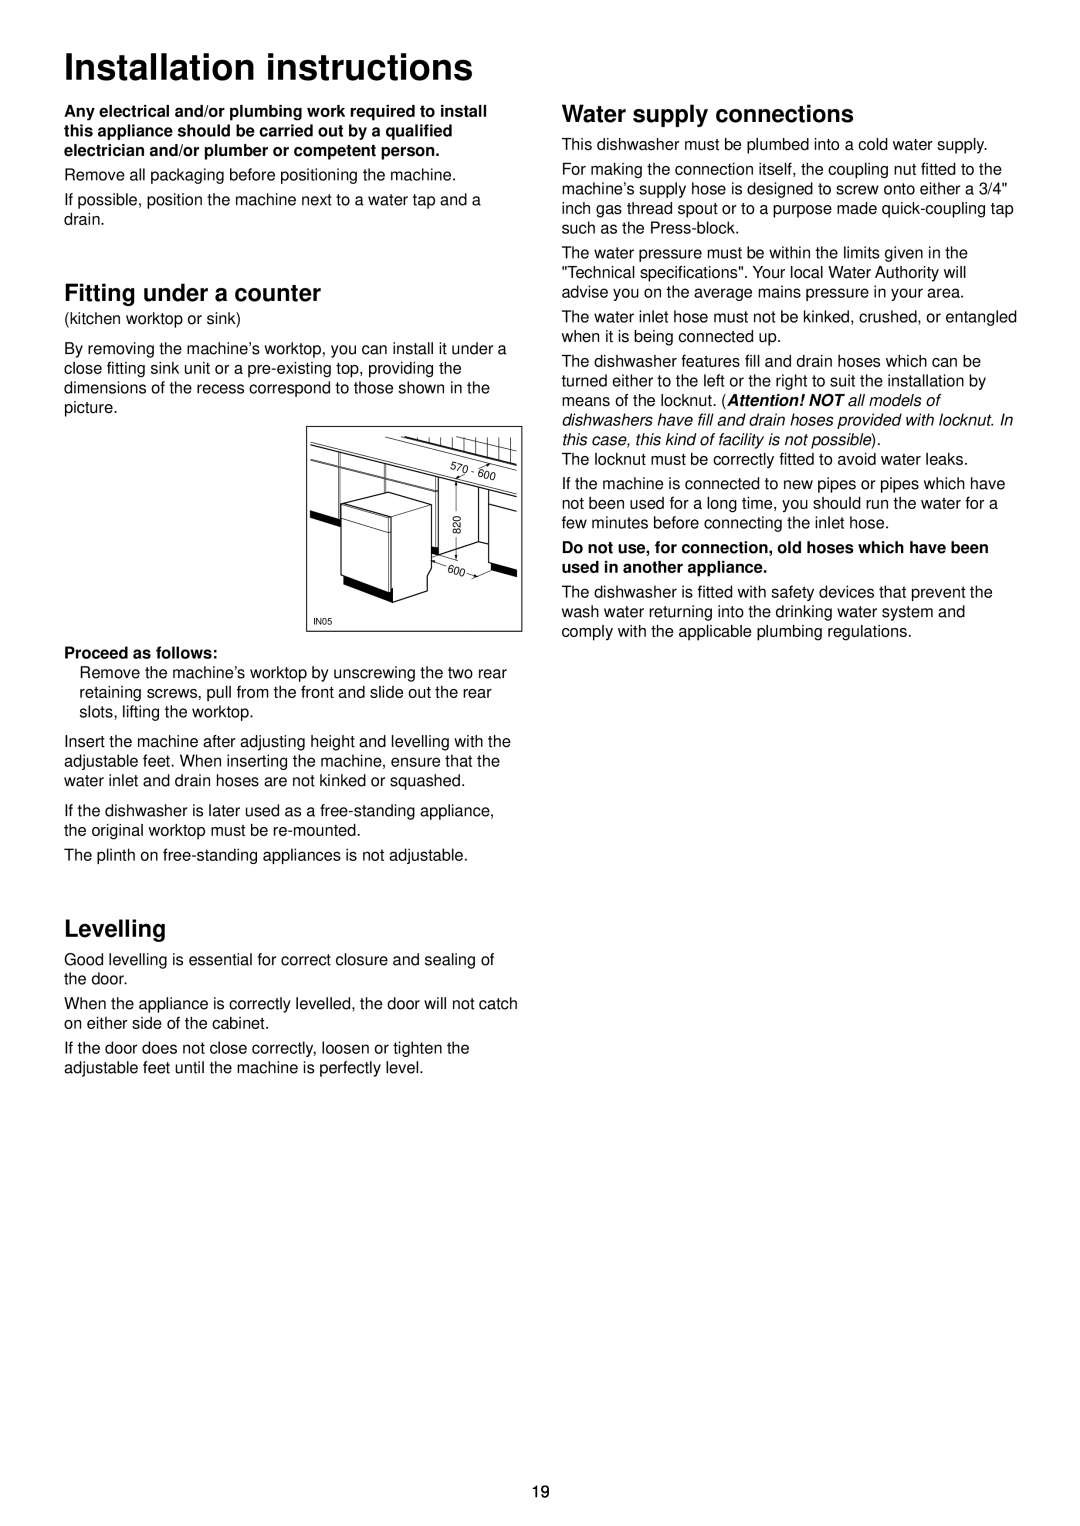 Zanussi DE 6865 manual Installation instructions, Fitting under a counter, Levelling, Water supply connections 